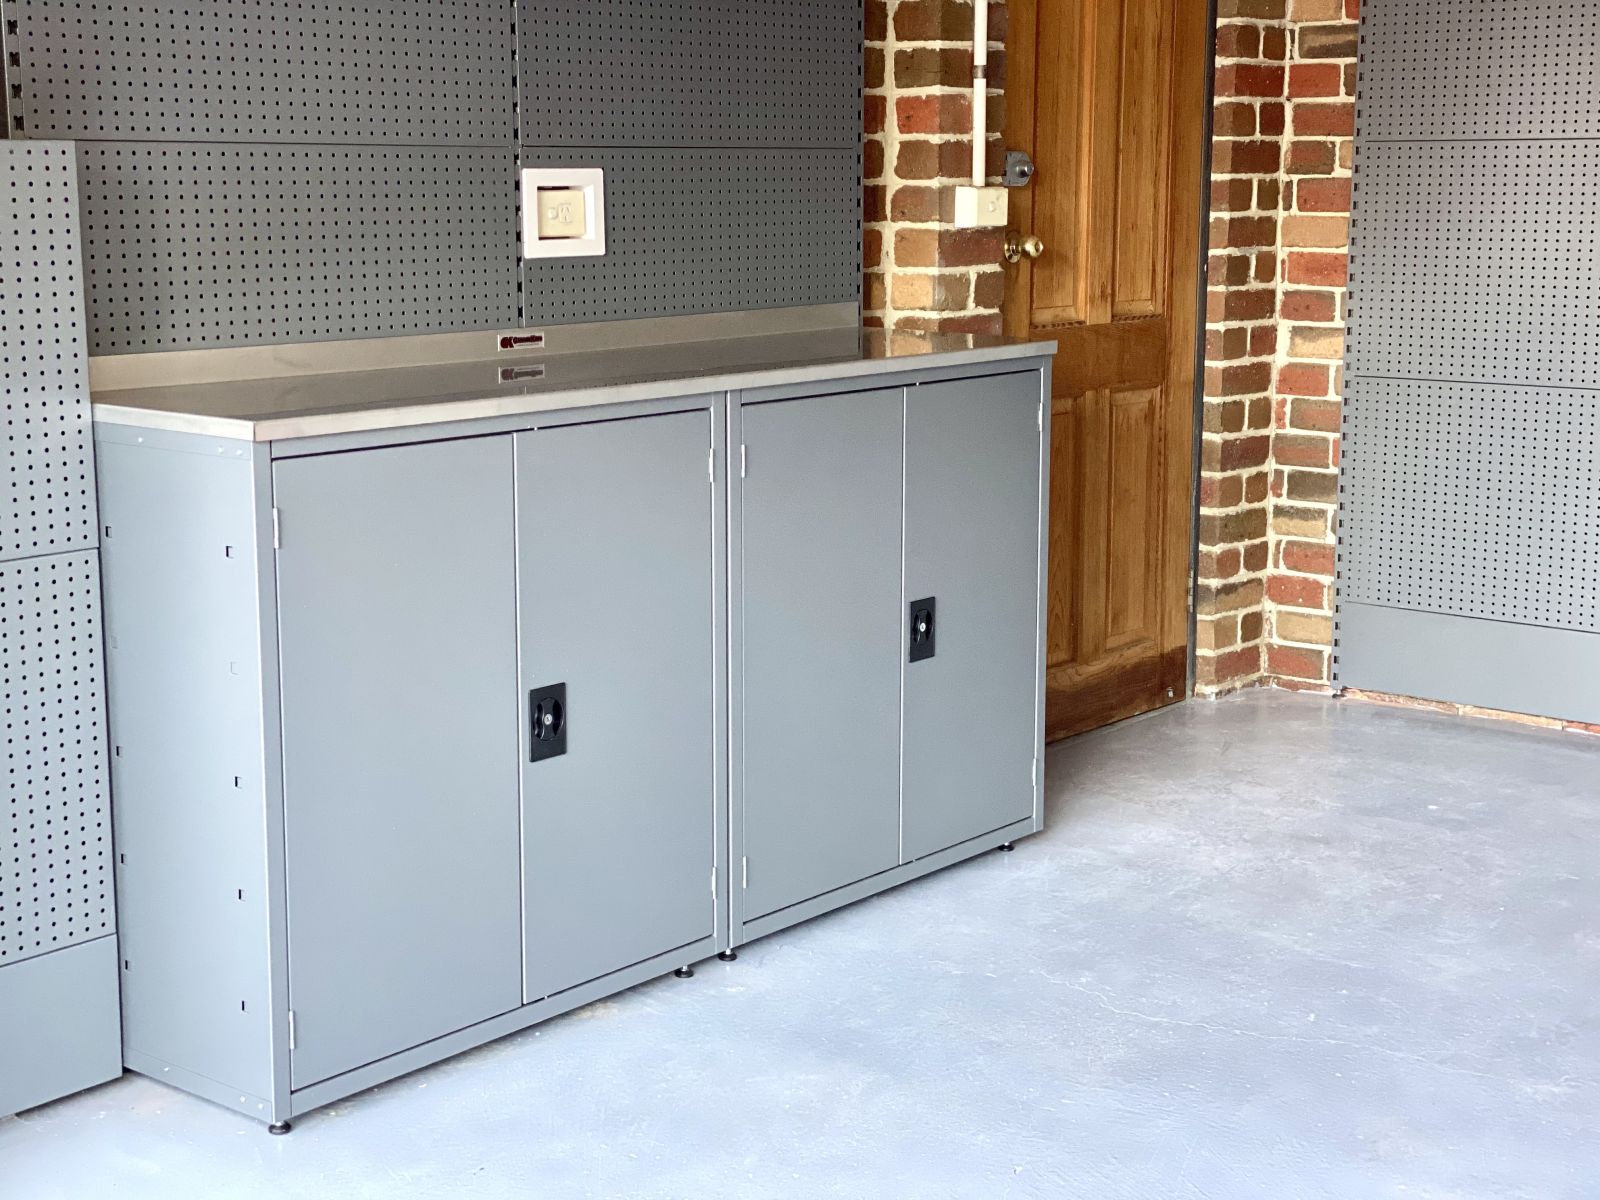 Garage storage solution with work bench, cabinets and perforated wall